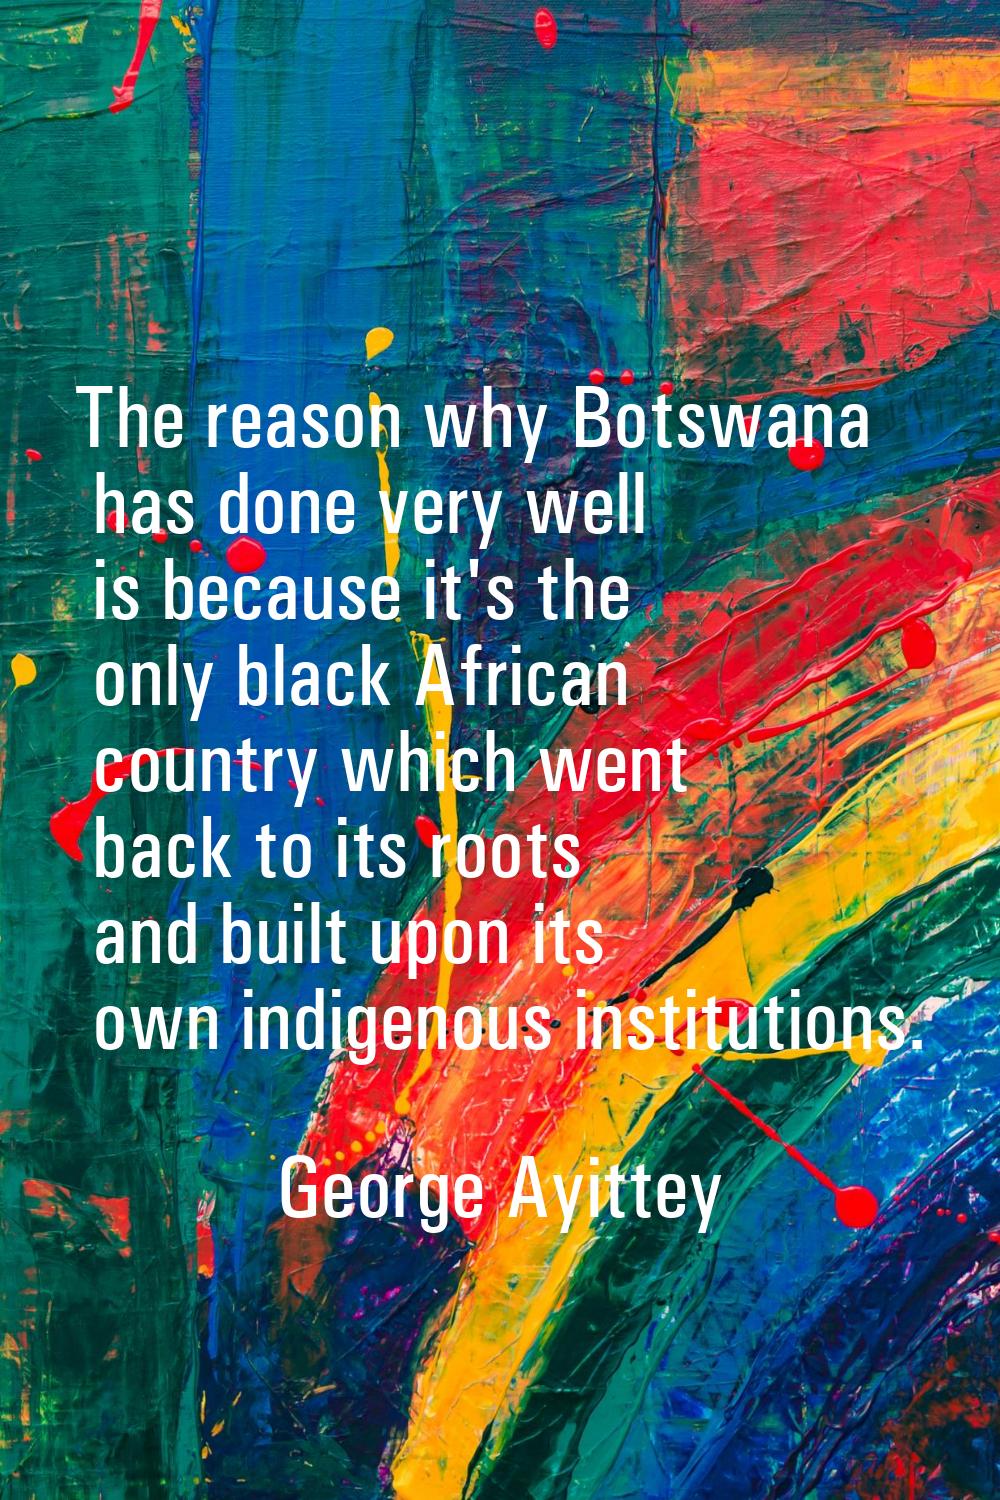 The reason why Botswana has done very well is because it's the only black African country which wen